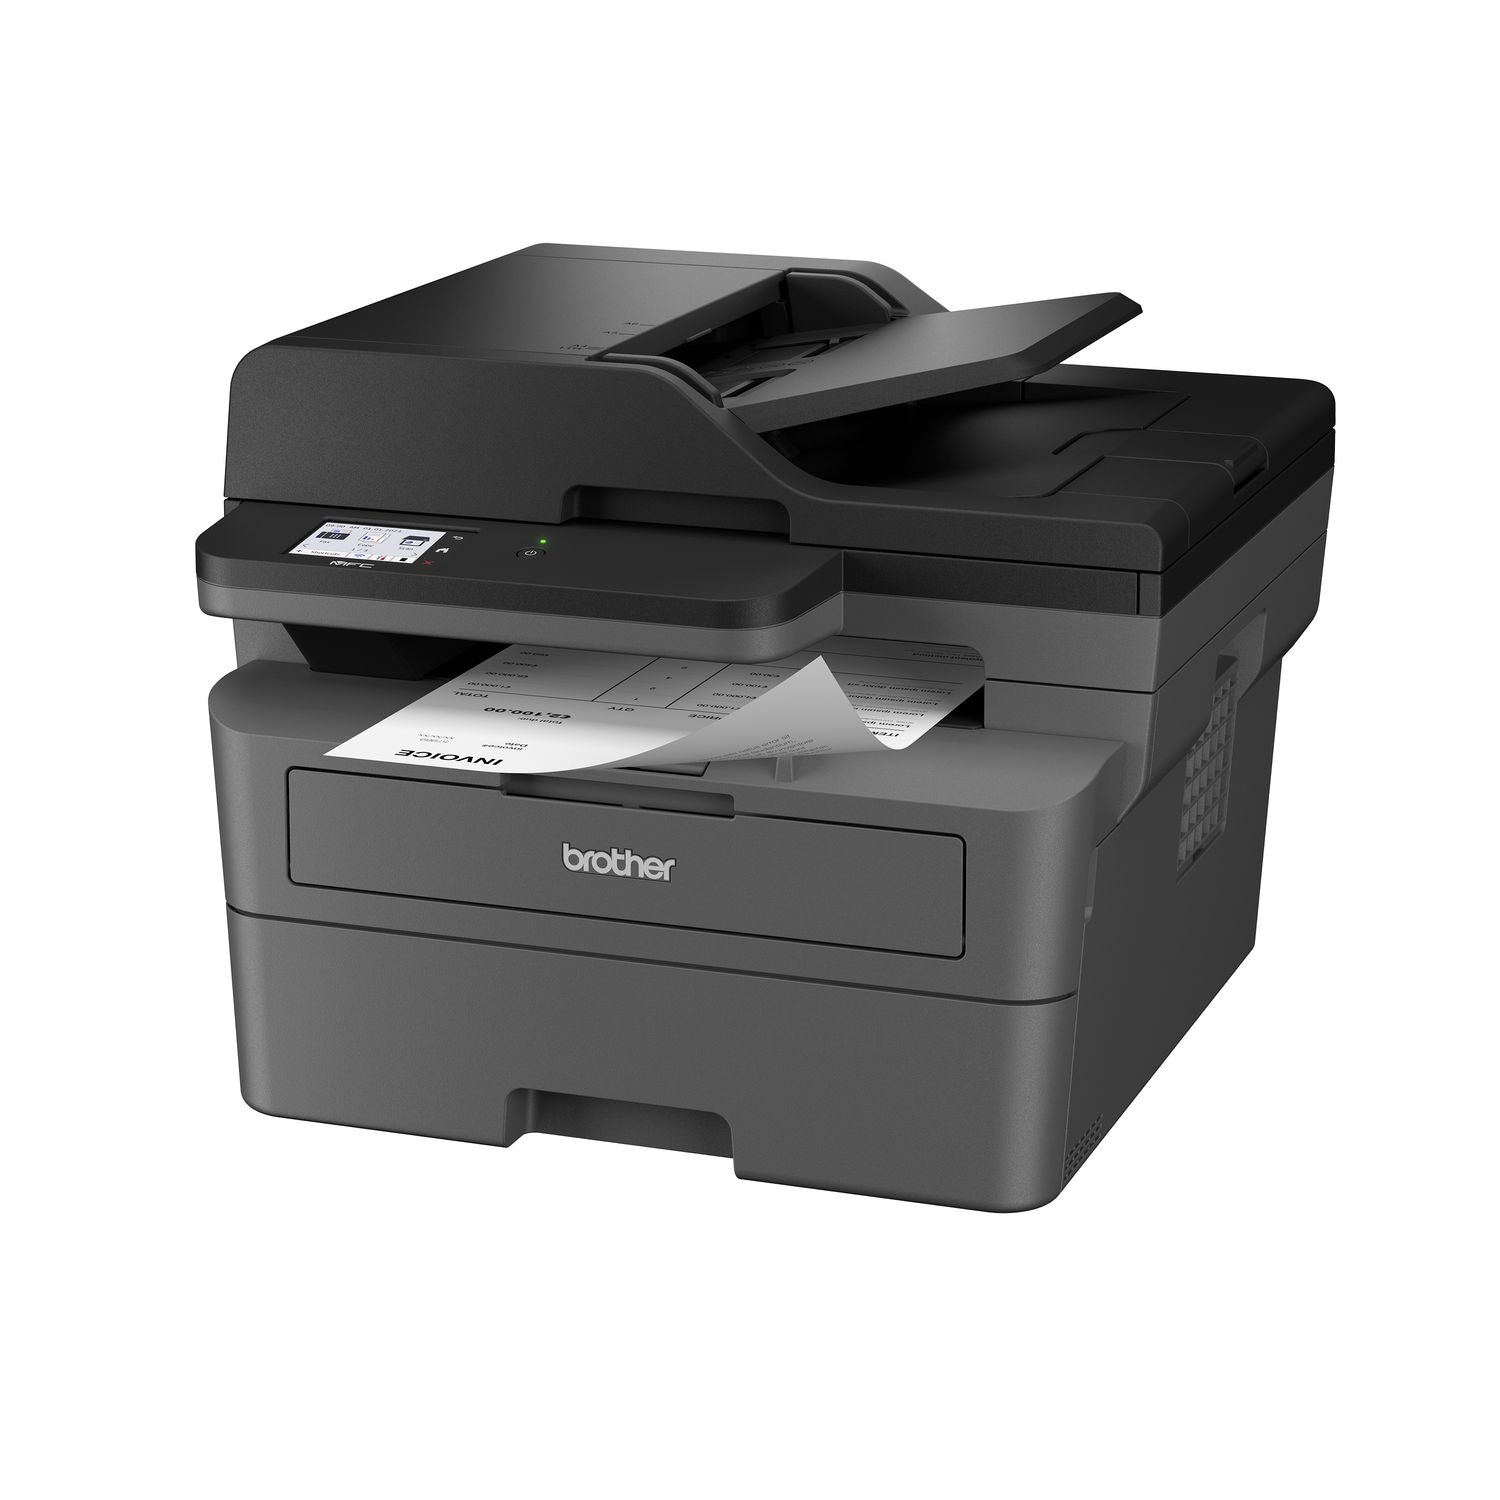 mfc-l2820dw-wireless-compact-monochrome-all-in-one-laser-printer-copy-fax-print-scan_brtmfcl2820dw - 2